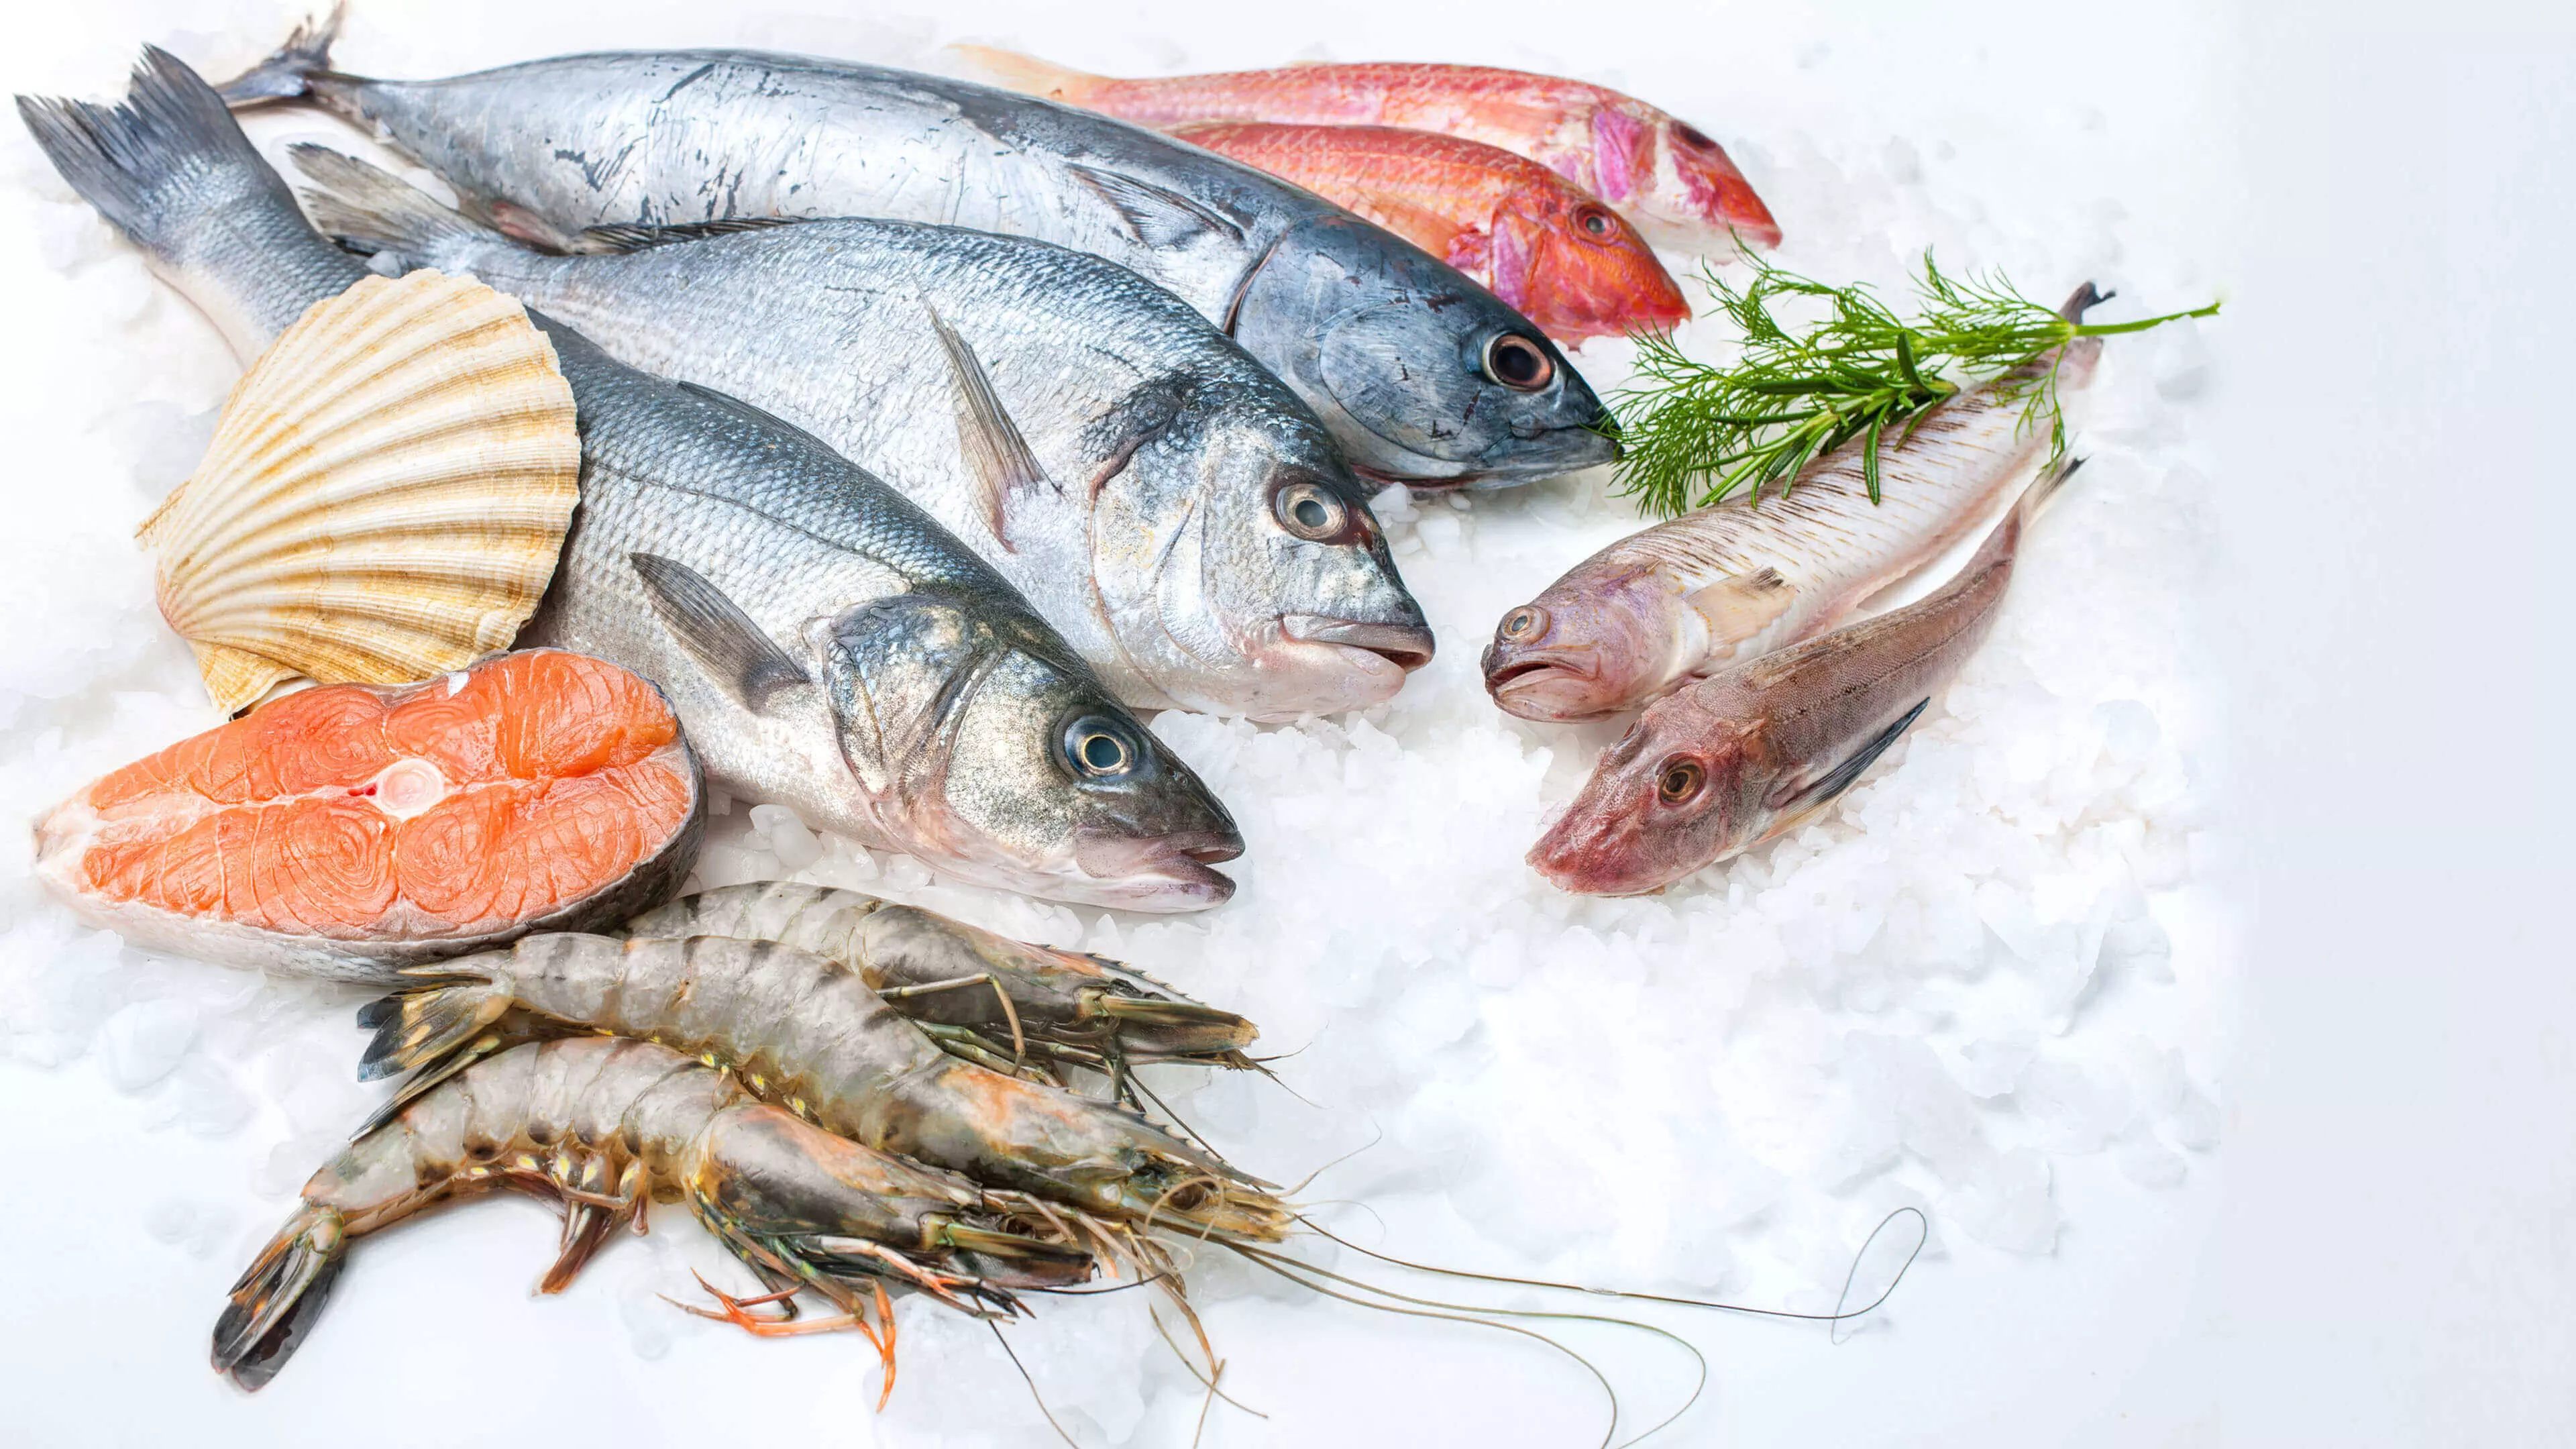 Mercury exposure due to seafood intake not tied to CVD or all cause mortality: JAMA